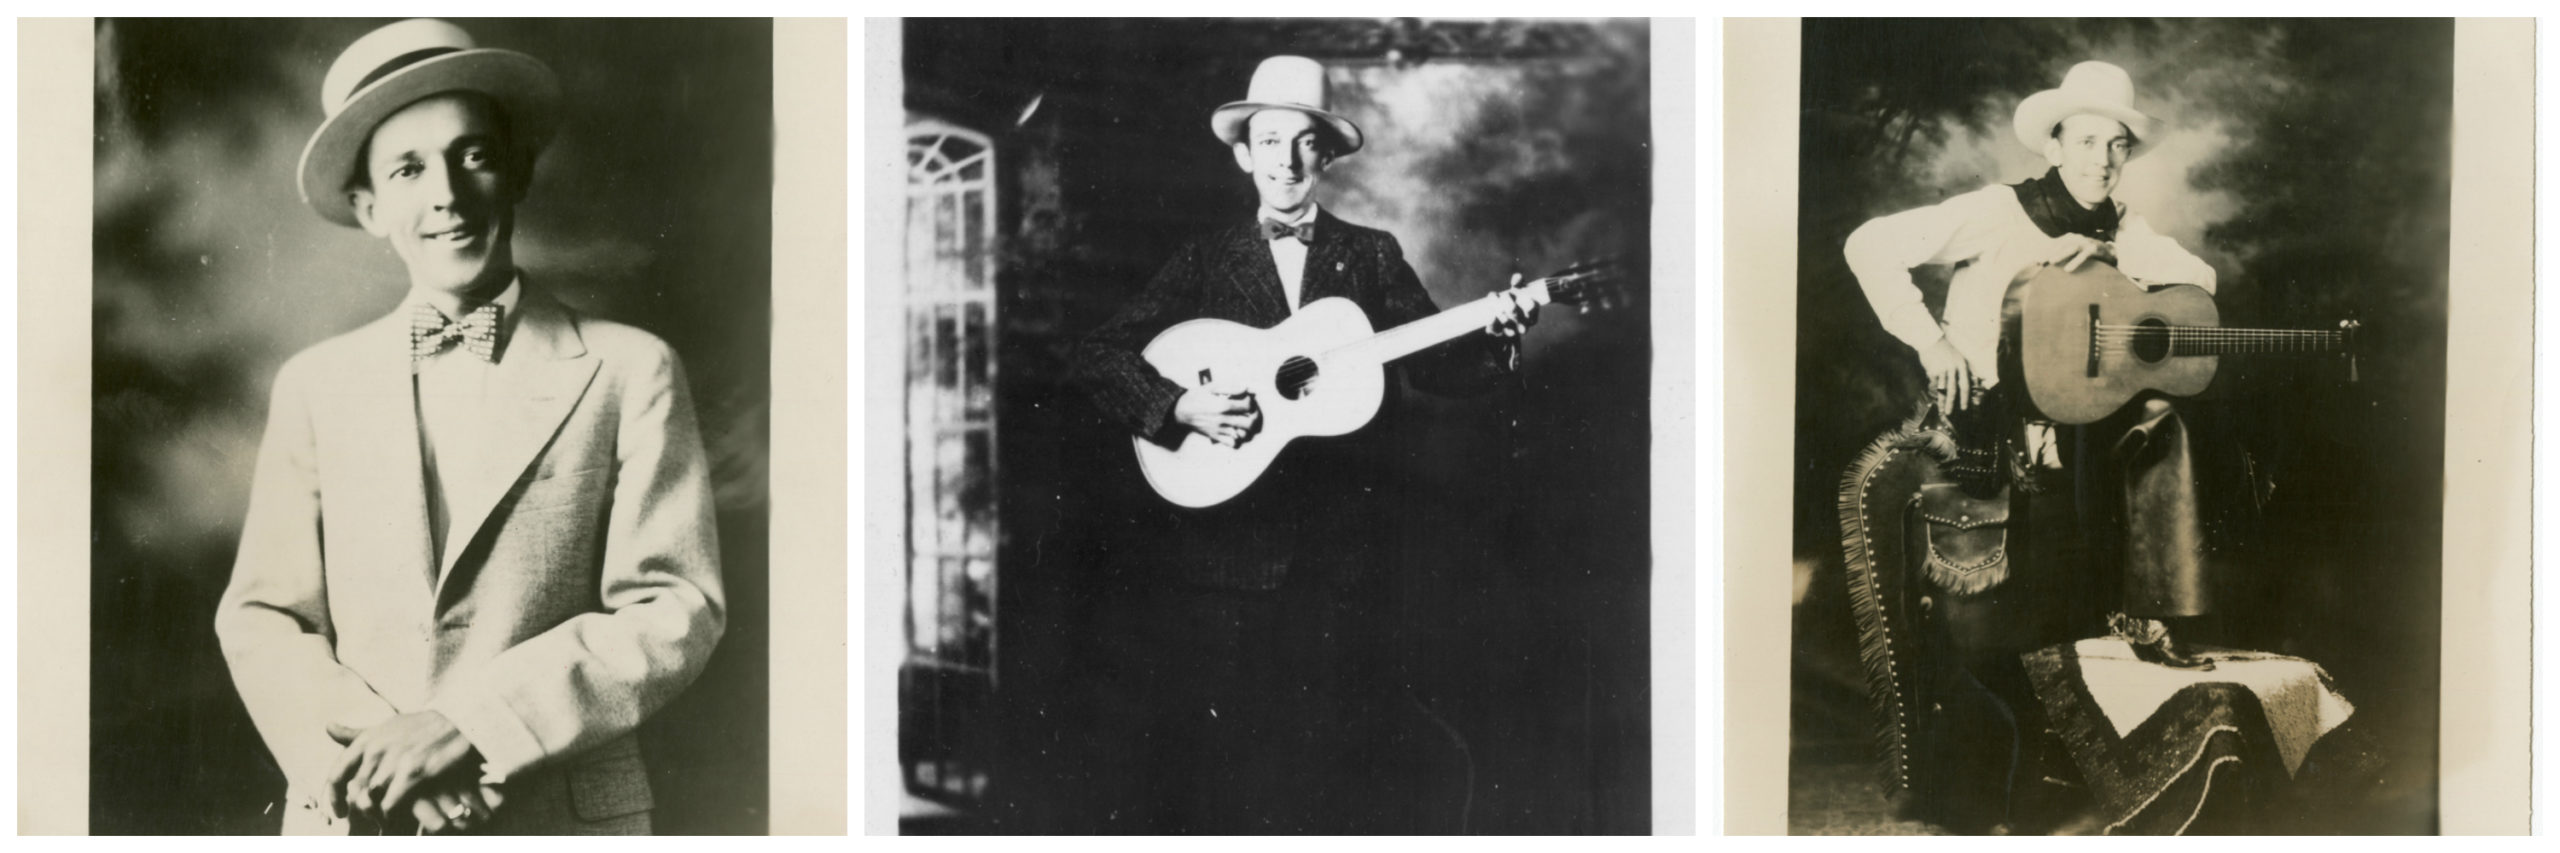 Jimmie Rodgers: Reflections on the Musical Genius of The Singing Brakeman